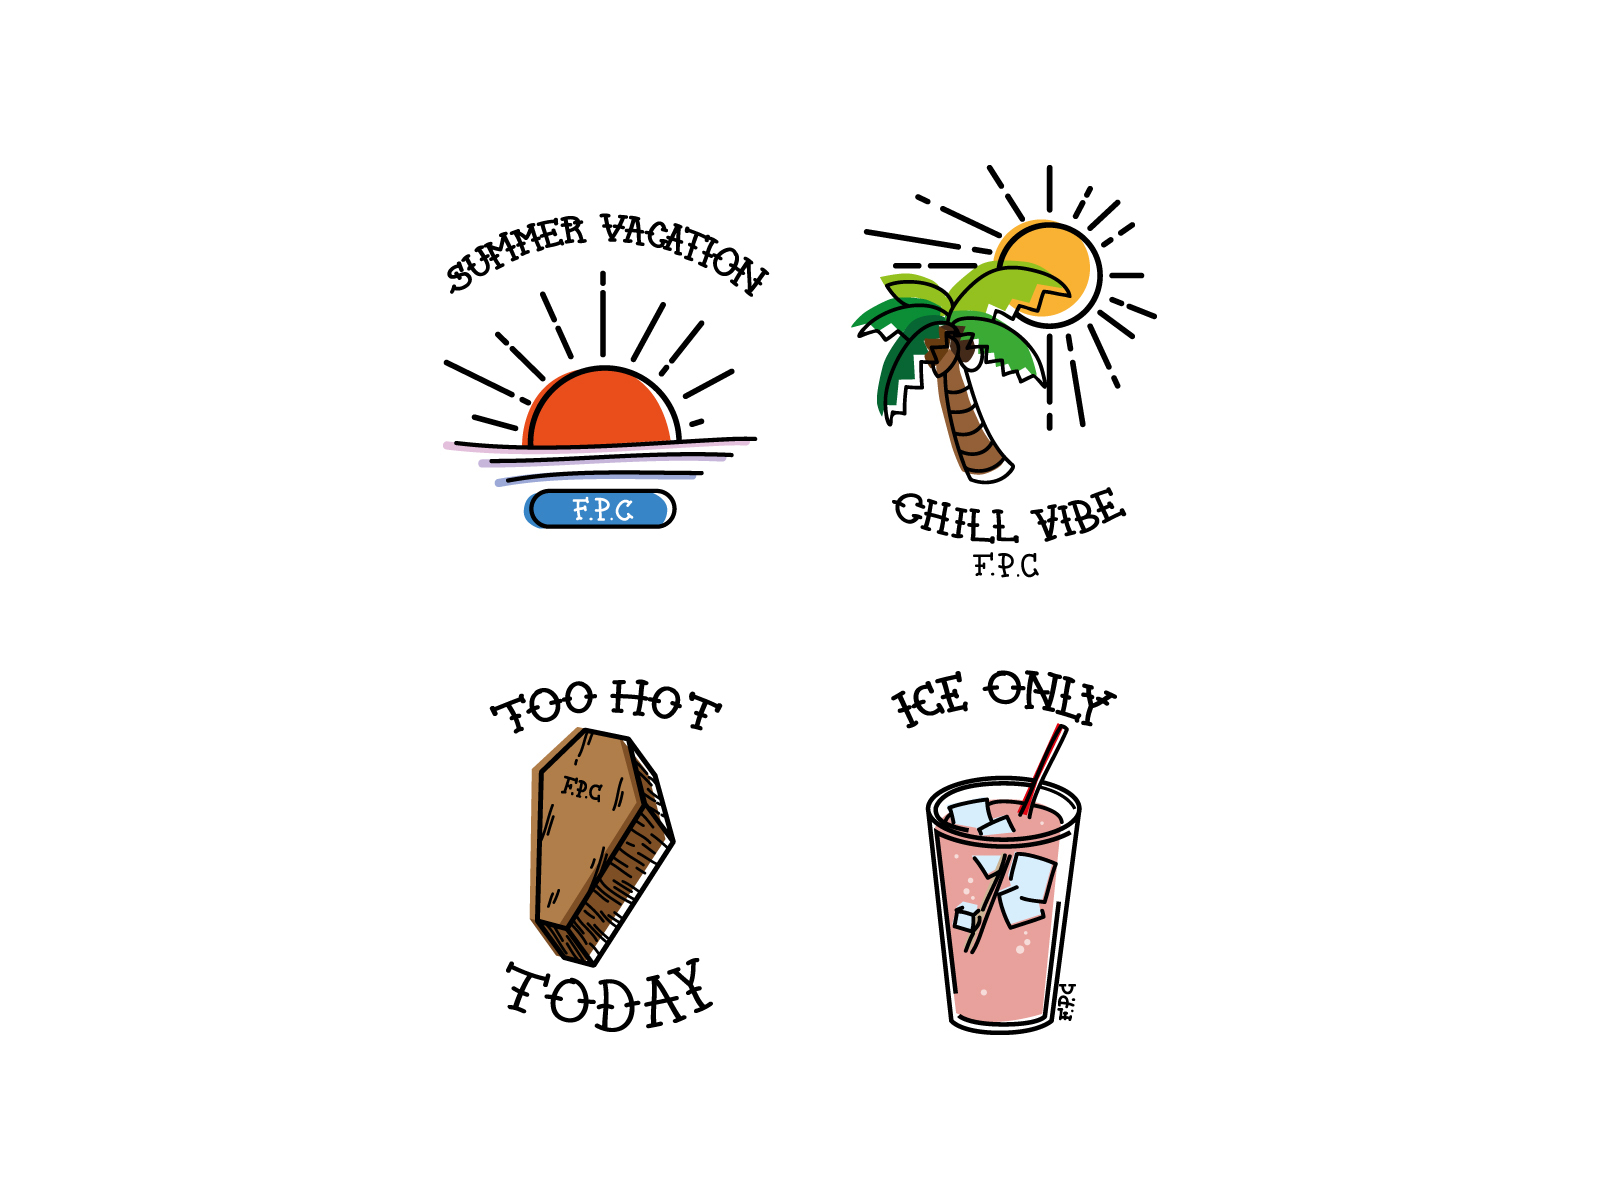 Hot Summer Vibe by Hwayeol Lee on Dribbble